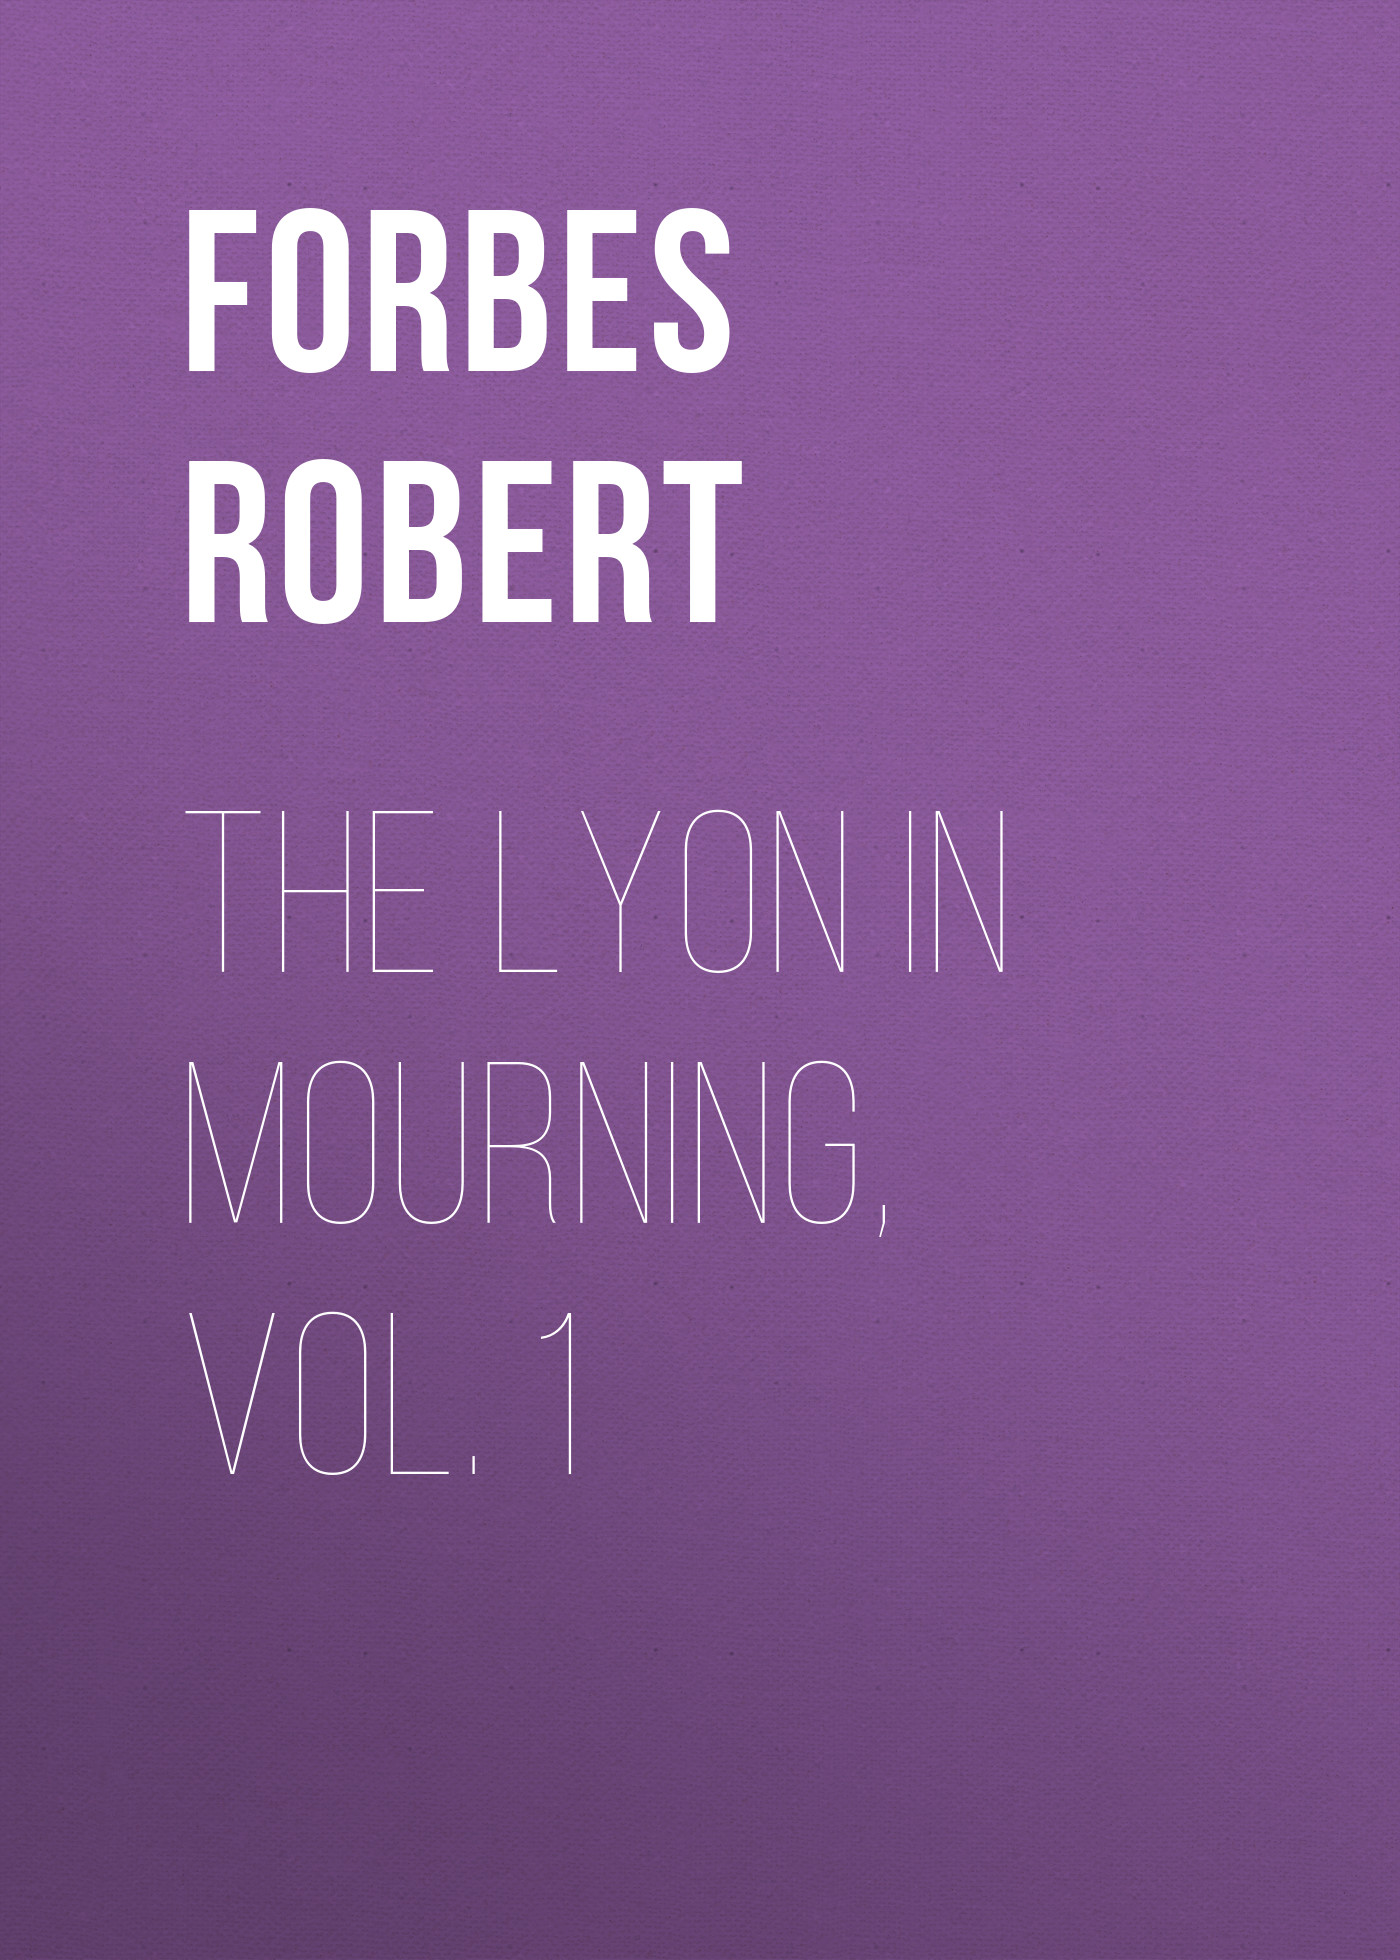 Forbes Robert The Lyon in Mourning, Vol. 1